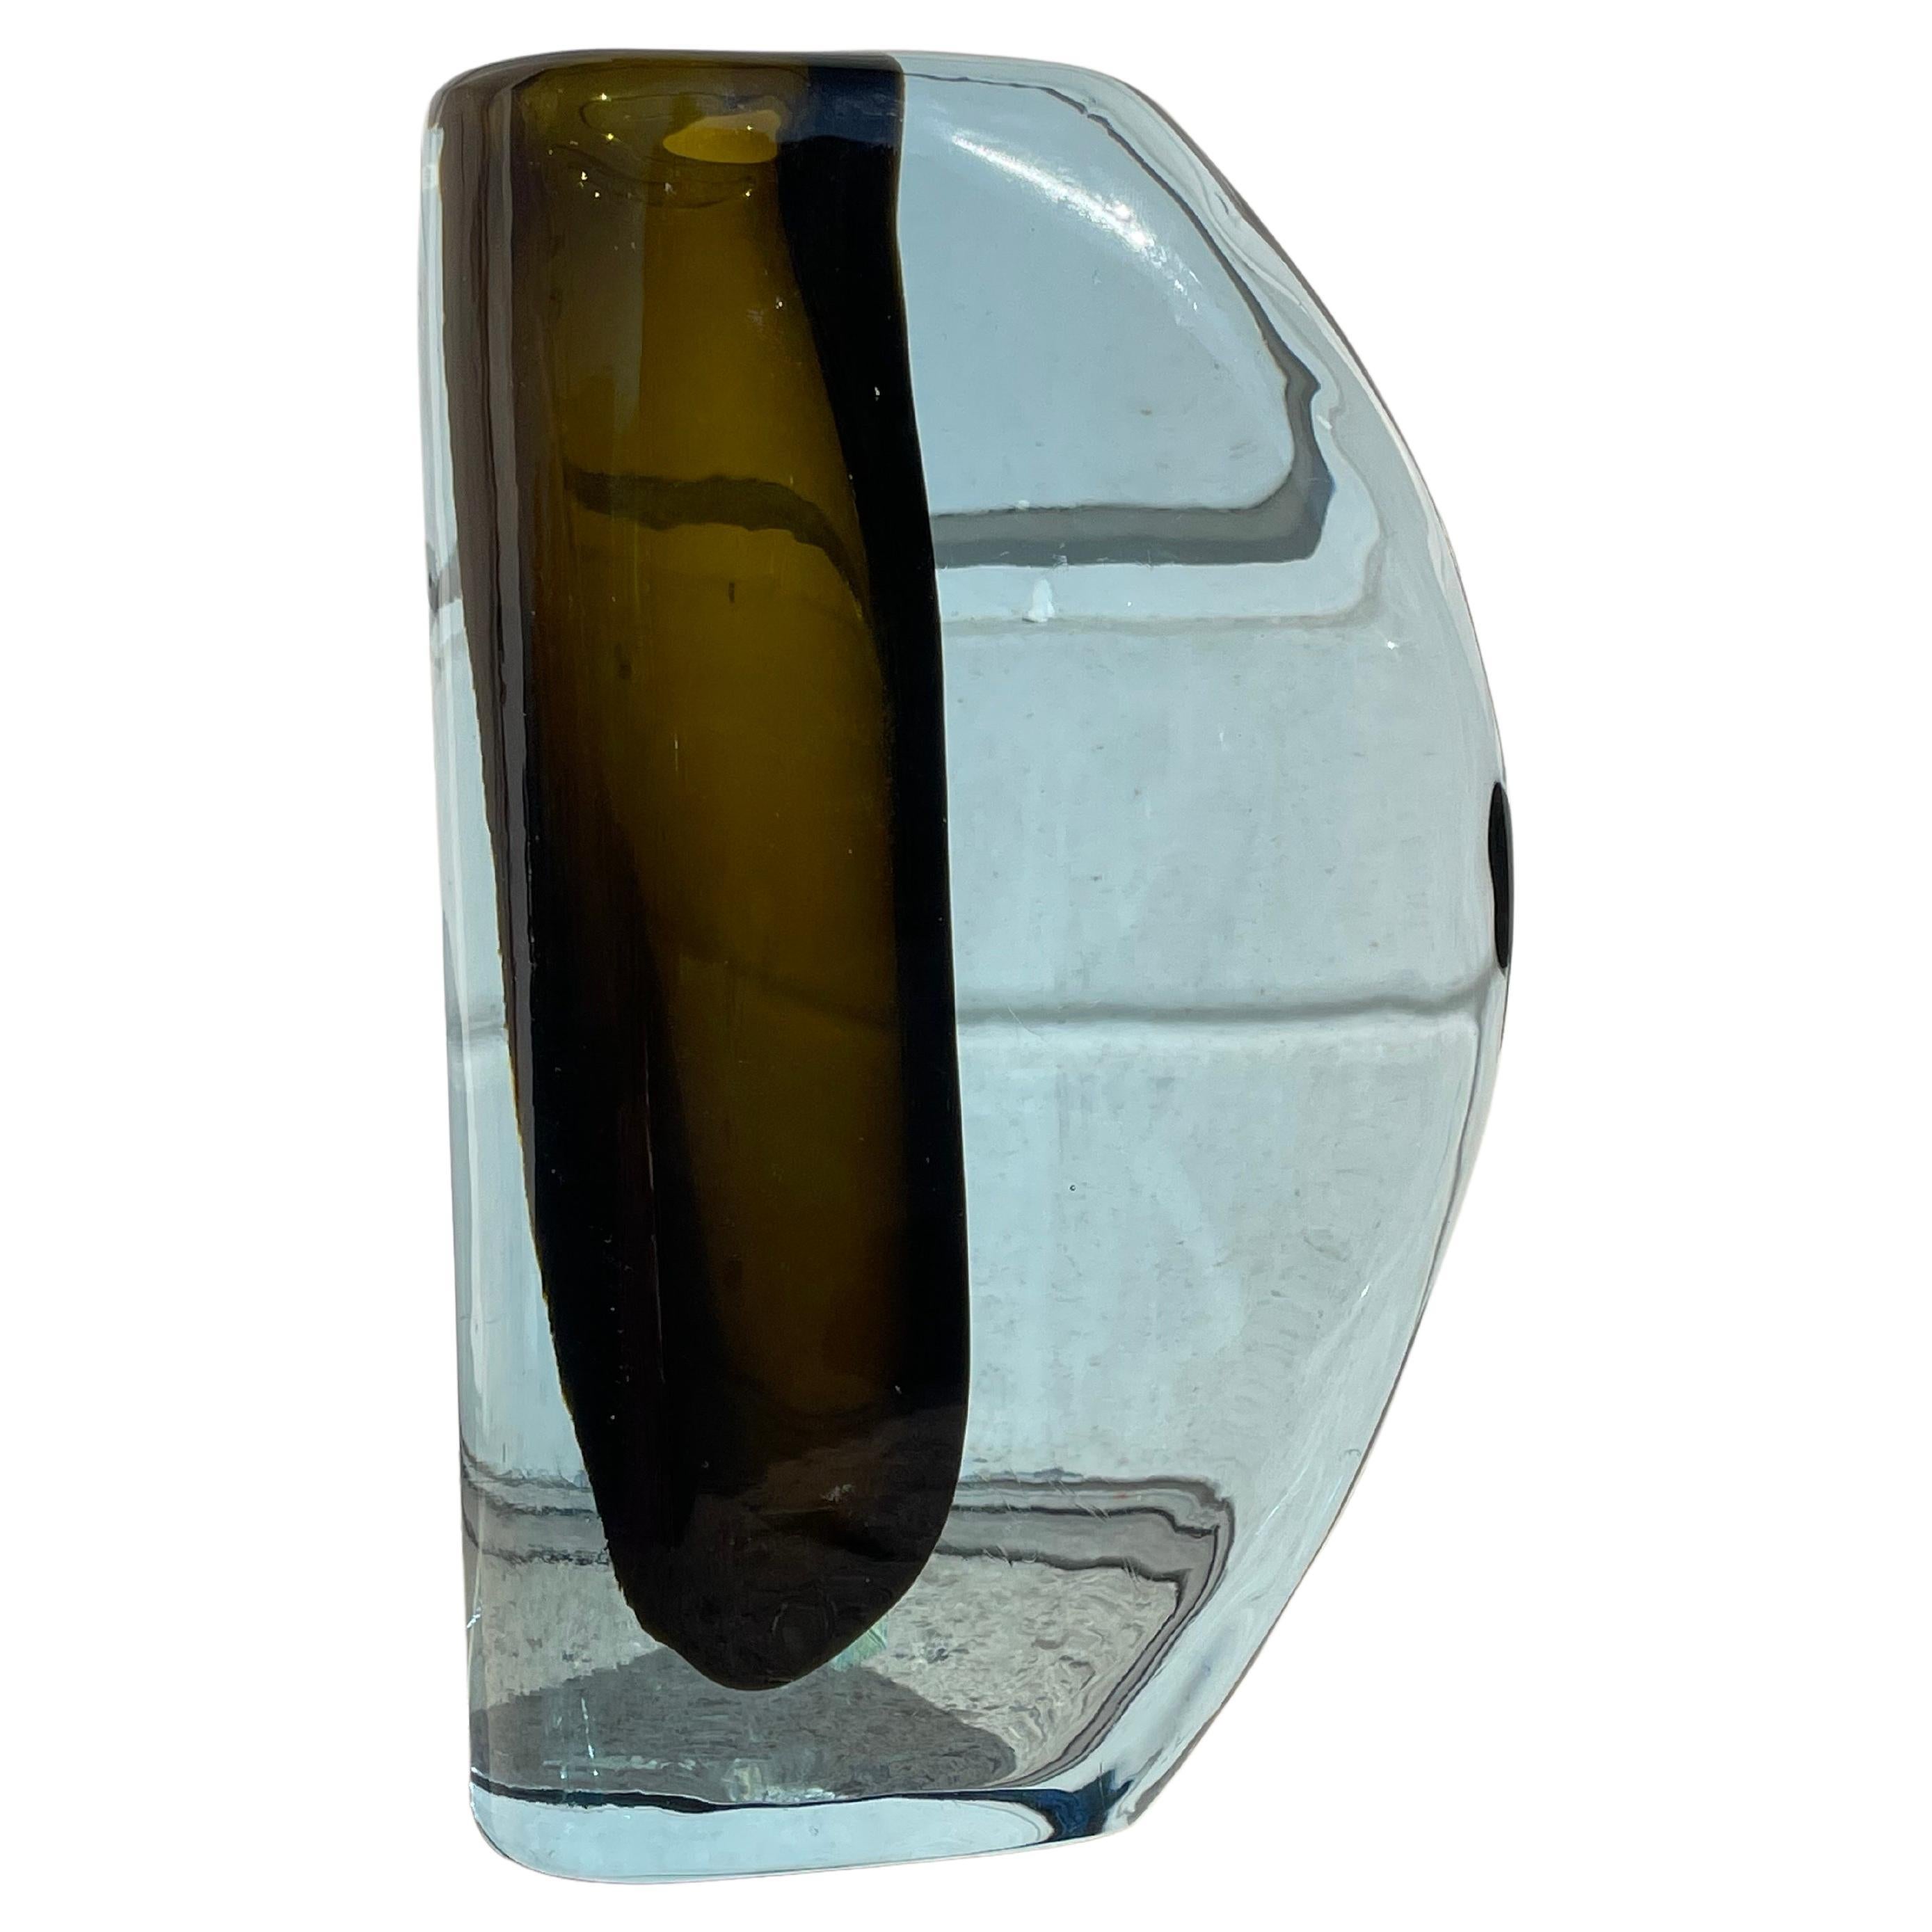 Hand-Crafted Italian Mid-Century Modern Momento Glass Vase by, Antonio Da Ros for Cenedese